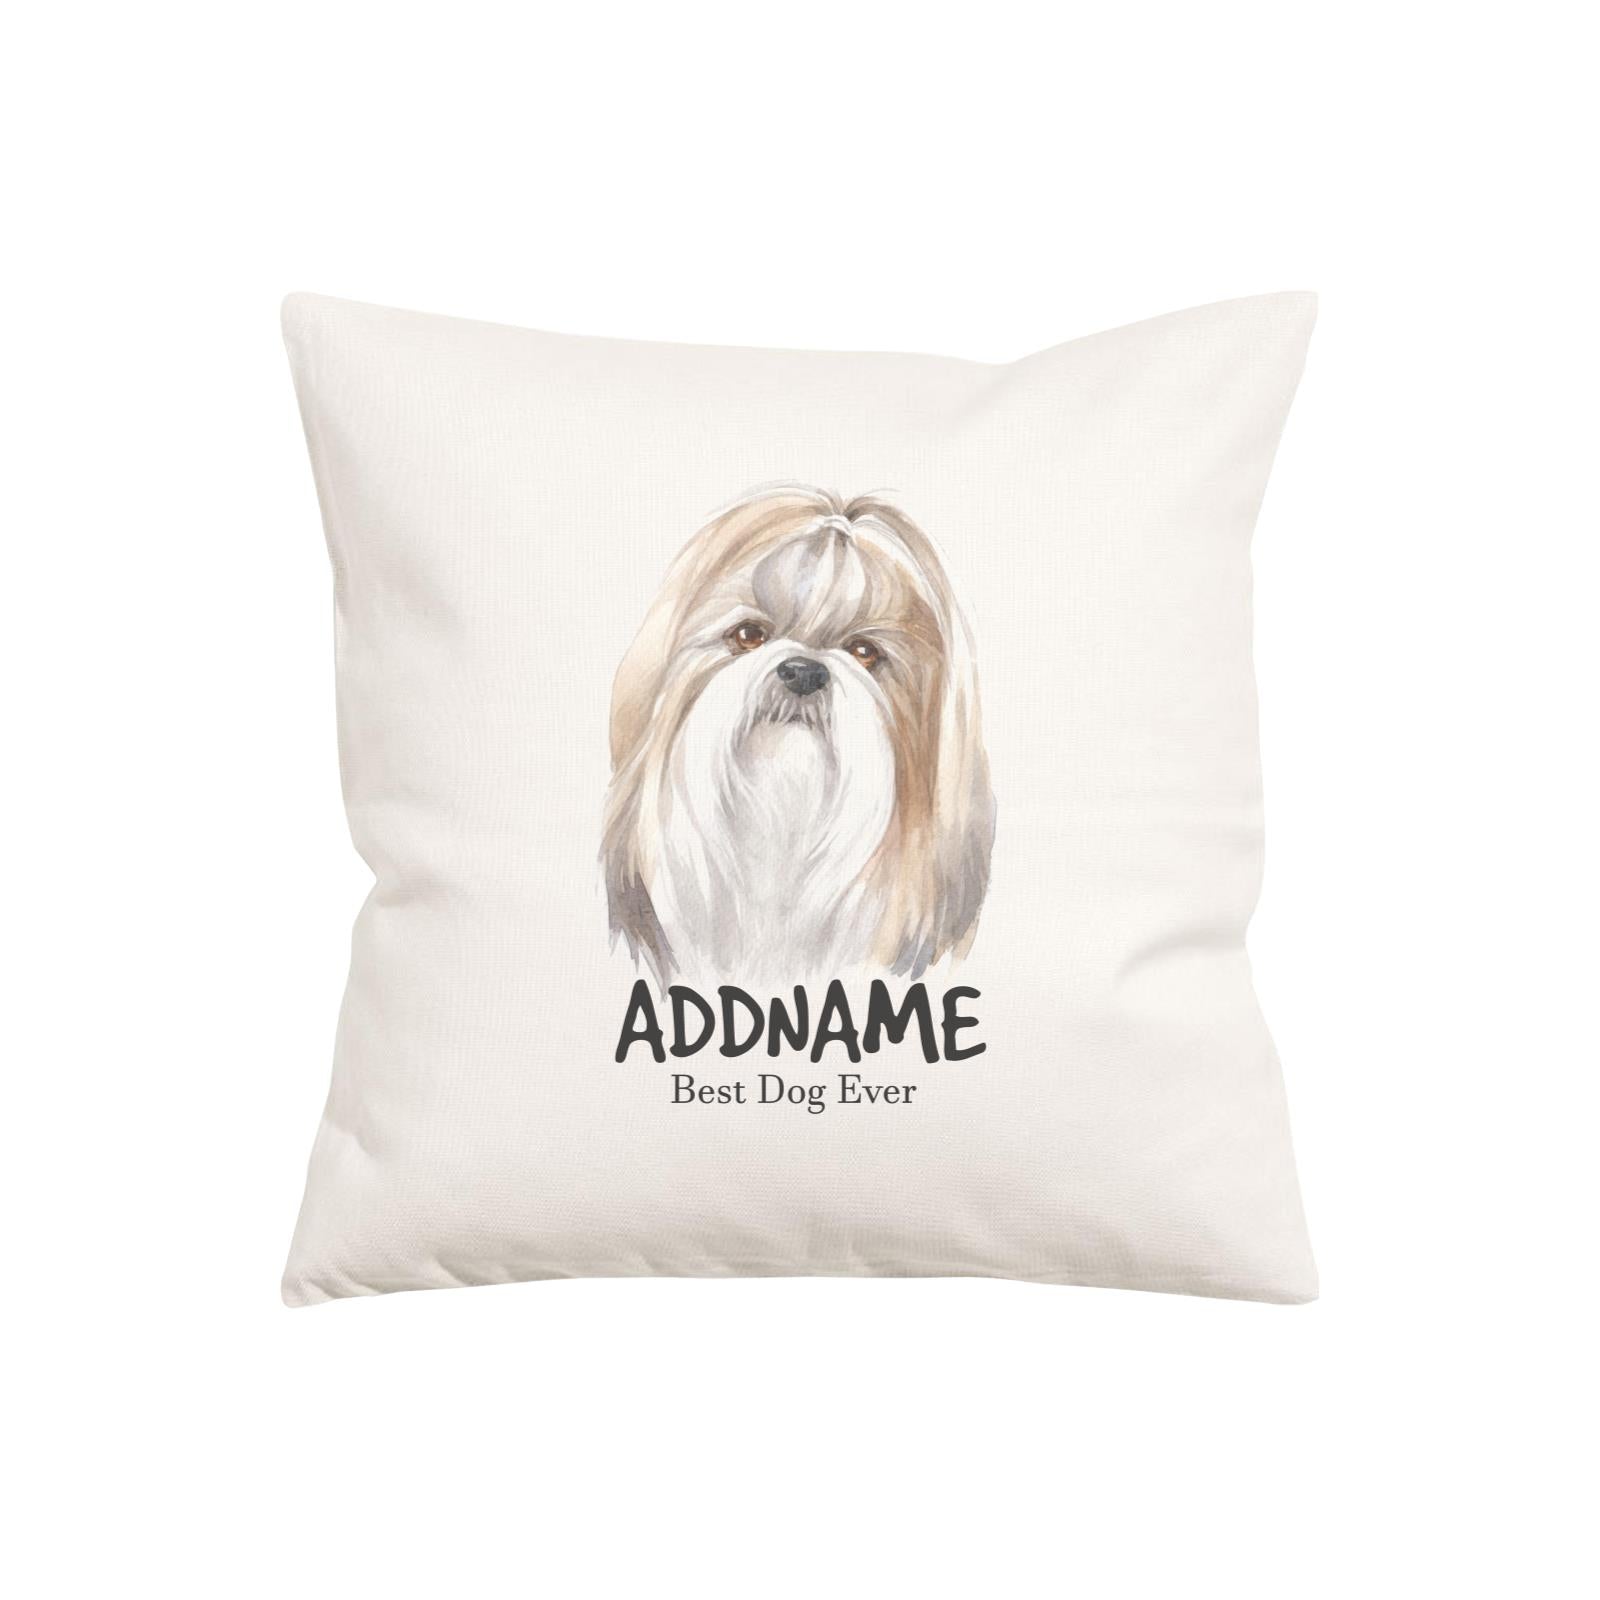 Watercolor Dog Series Shih Tzu Best Dog Ever Addname Pillow Cushion